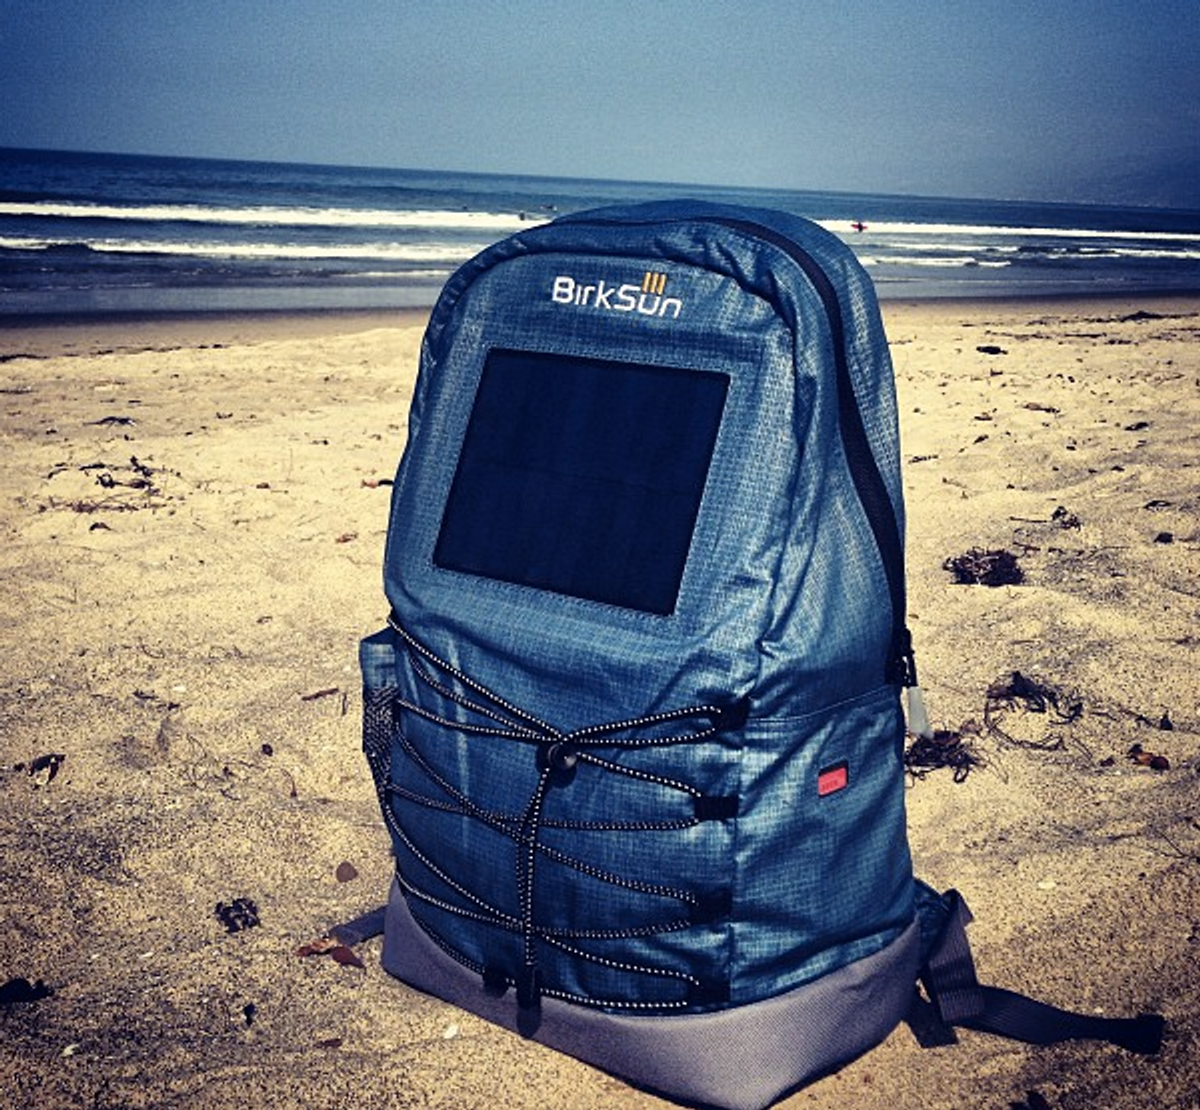 The BirkSun, shown in Levels Teal, has a built-in solar panel and rechargeable battery (BirkSun/Instagram)